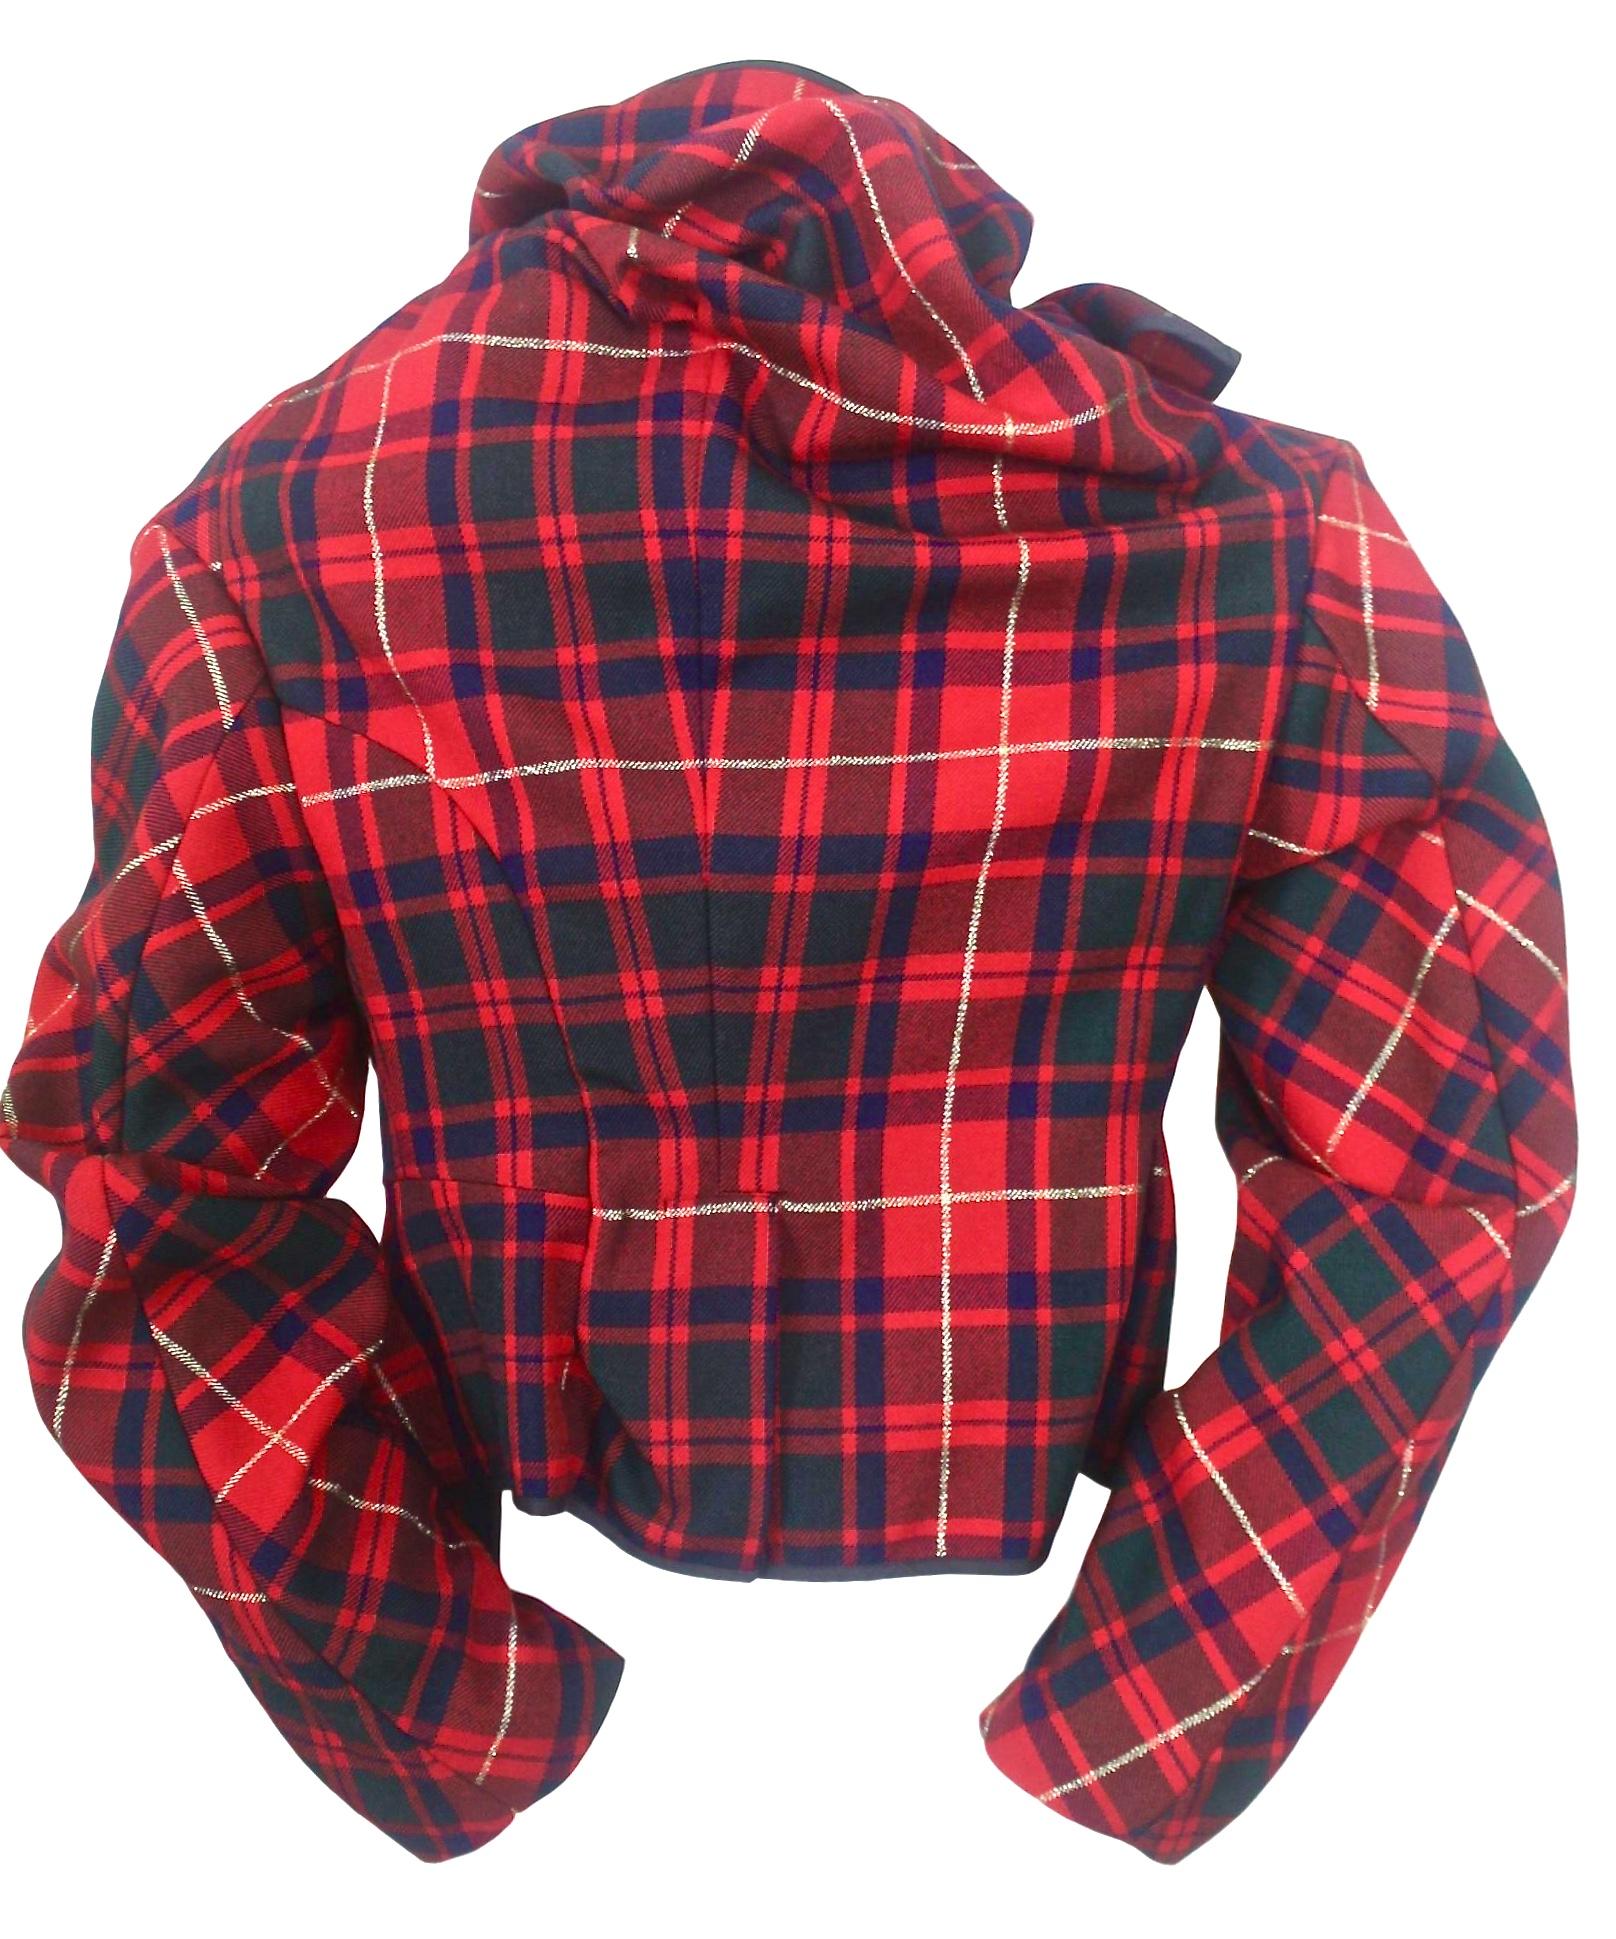 Comme des Garcons 1999 Collection Tartan Jacket In Excellent Condition For Sale In Bath, GB